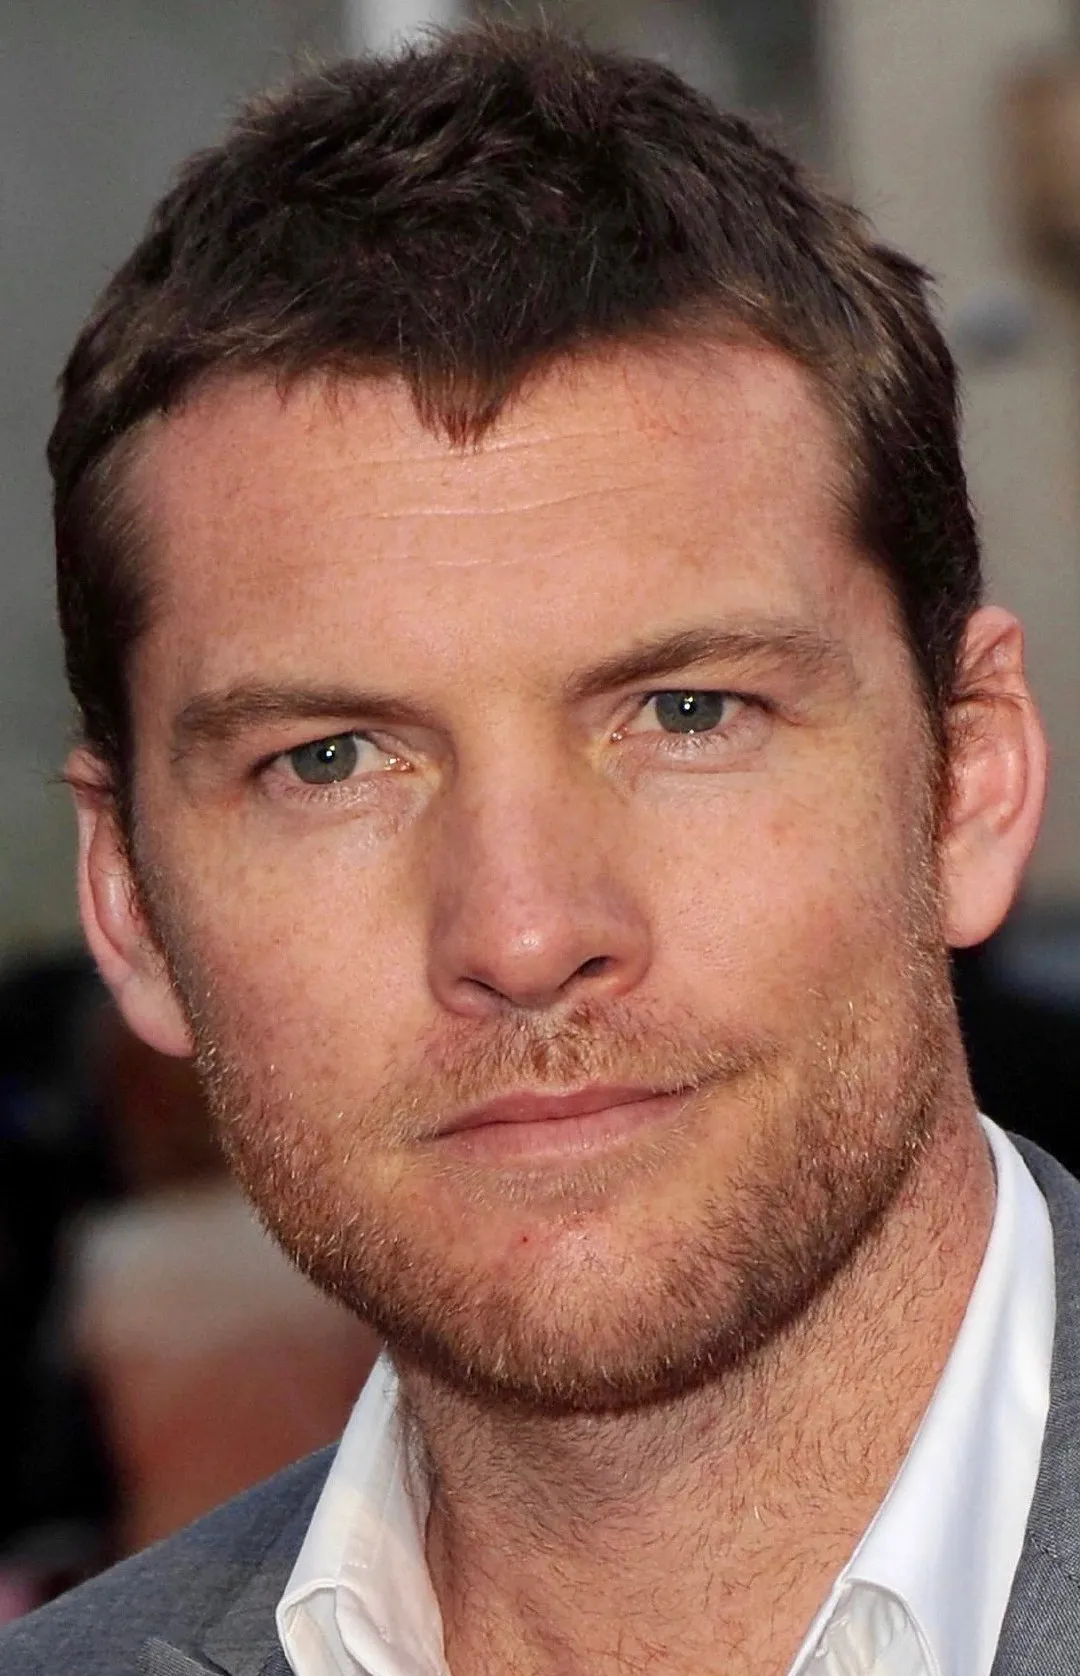 Sienna Miller, Sam Worthington and Jamie Campbell Bower to star in new historical film 'Horizon' directed by Kevin Costner | FMV6